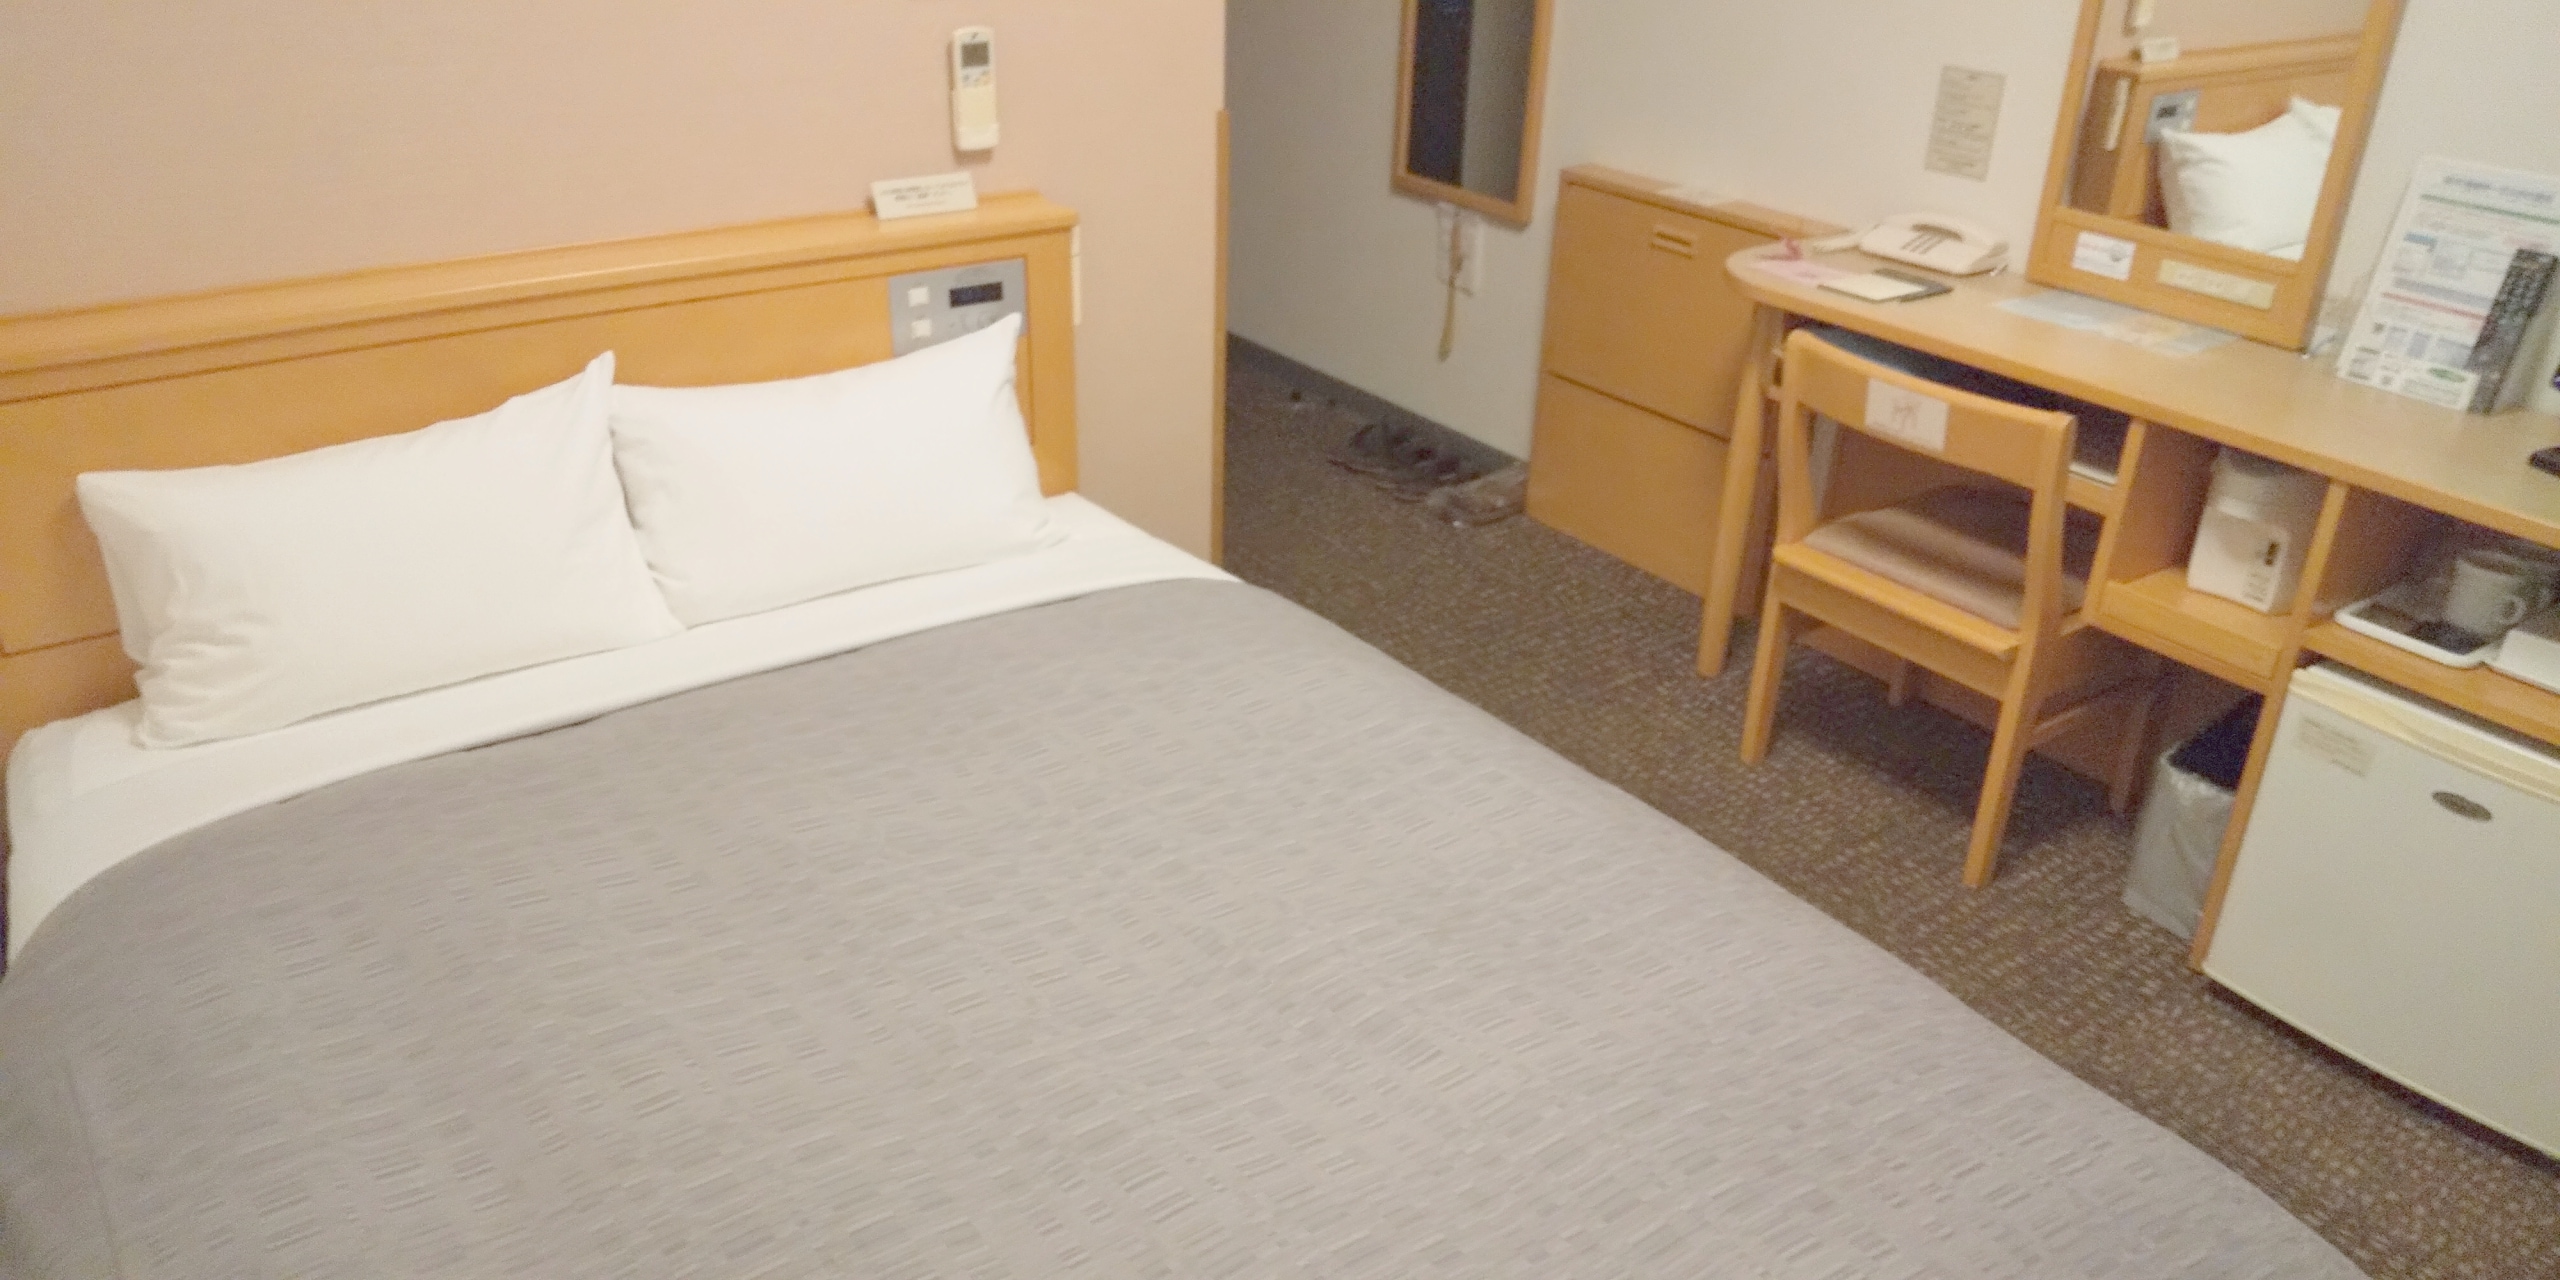 Standard semi-double room ◇ A convincing stay in a room that pursues comfort and convenience ♪